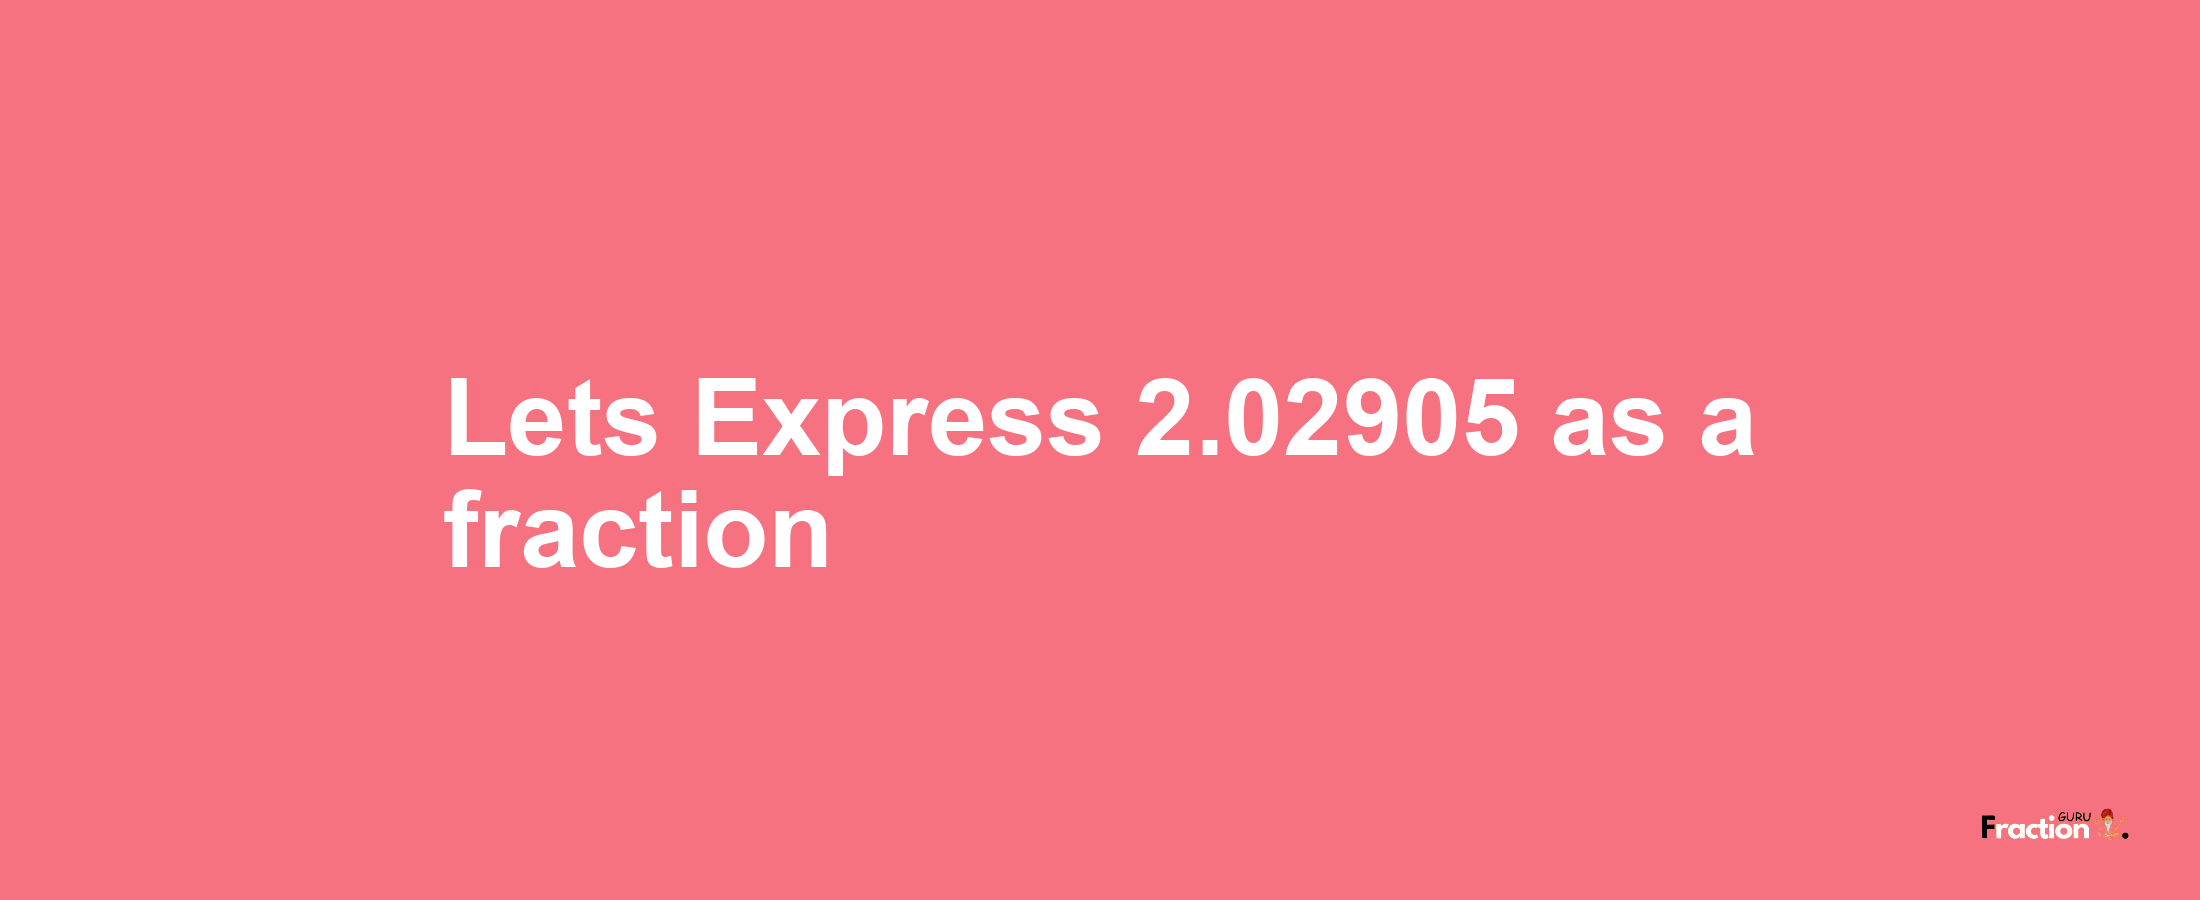 Lets Express 2.02905 as afraction